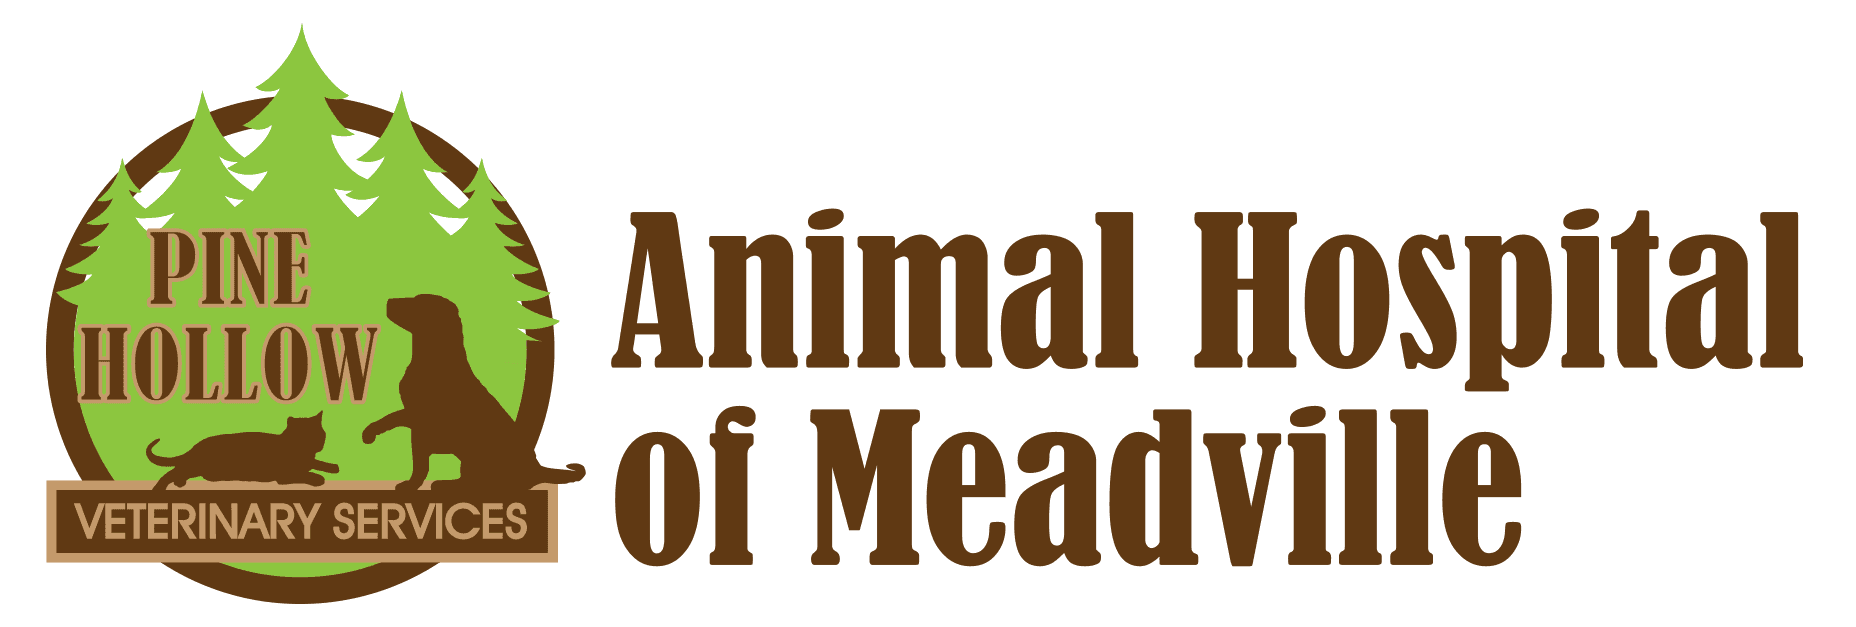 Animal Hospital of Meadville: Where Our Passion is Paved with Paw Prints